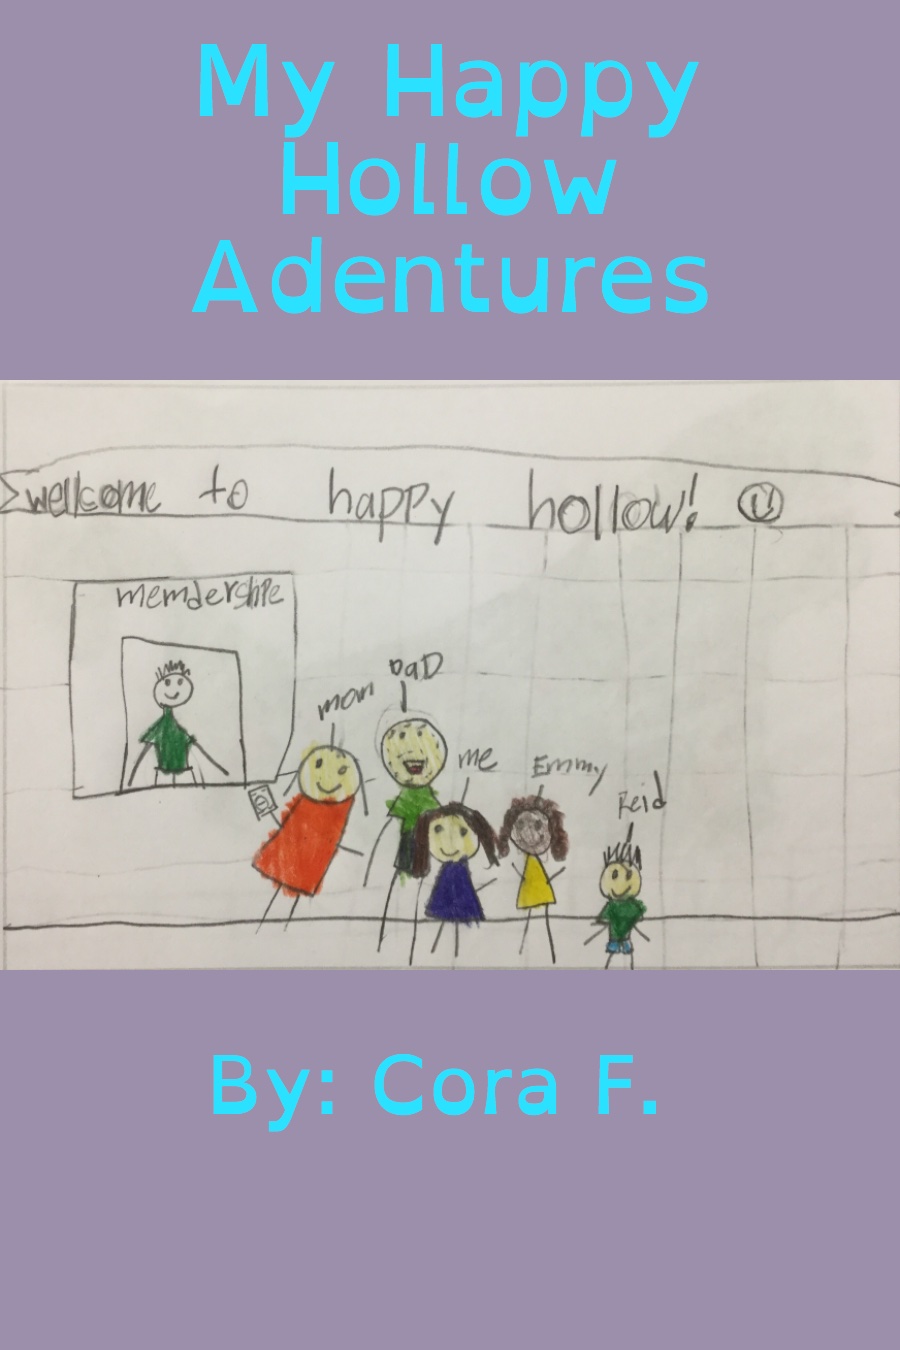 My Happy Hollow Adventure by Cora F